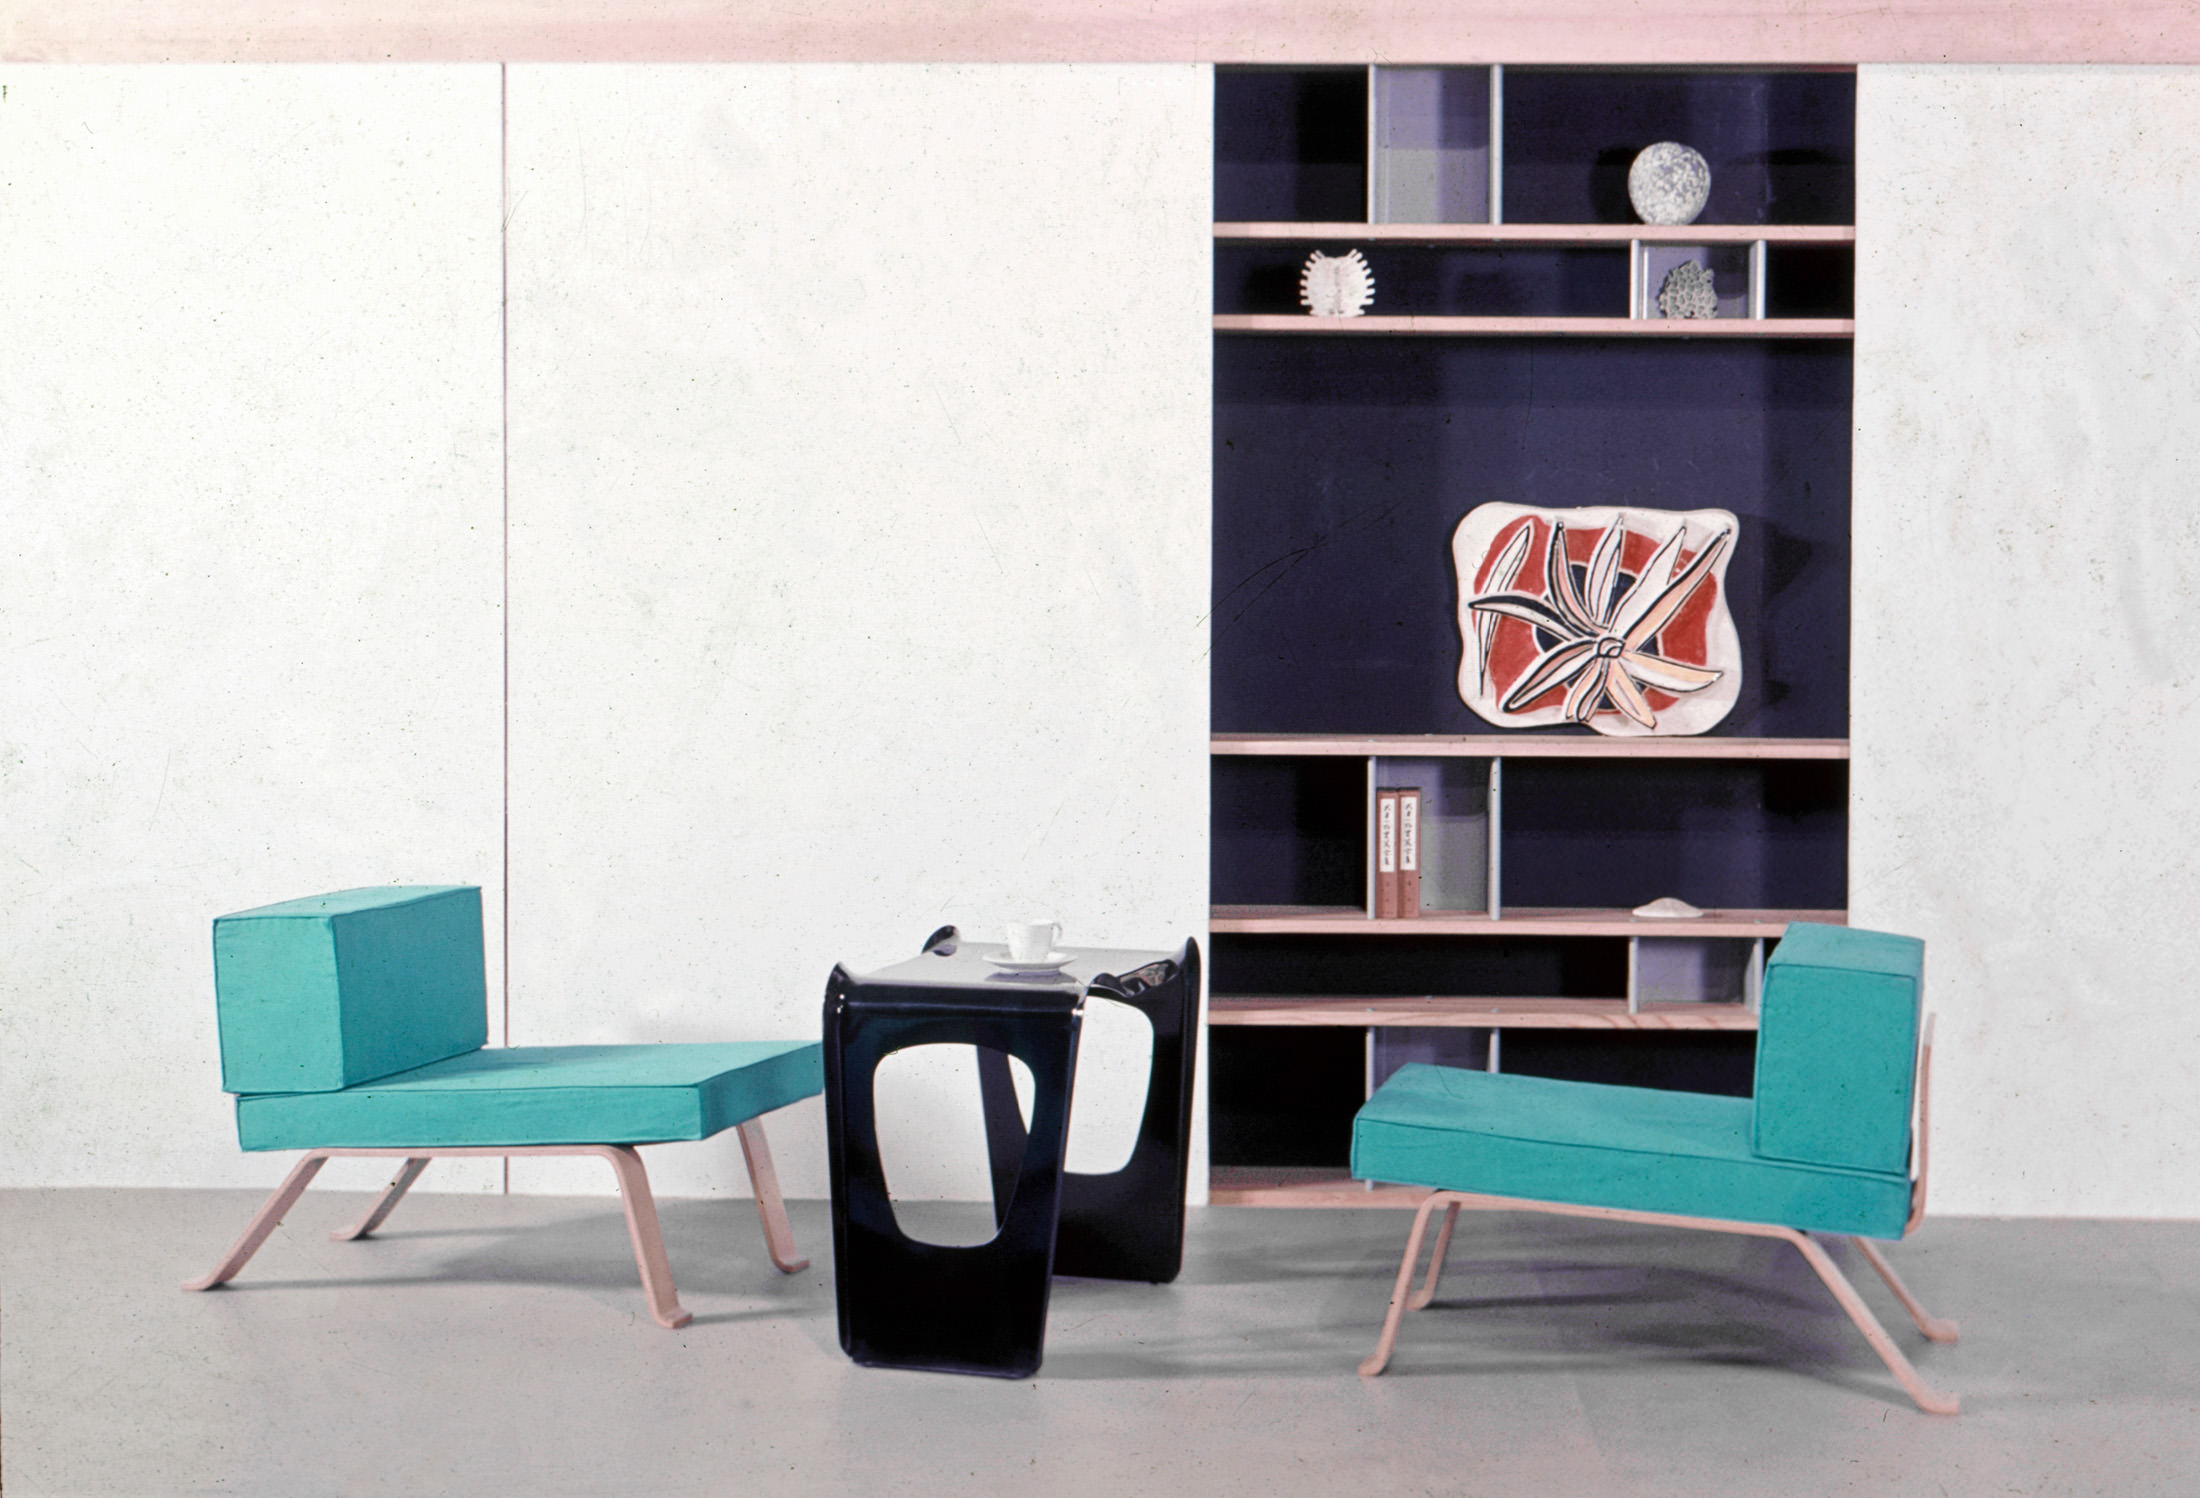 Charlotte Perriand’s 1955 design for a reception room. Courtesy of Louis Vuitton Fondation.